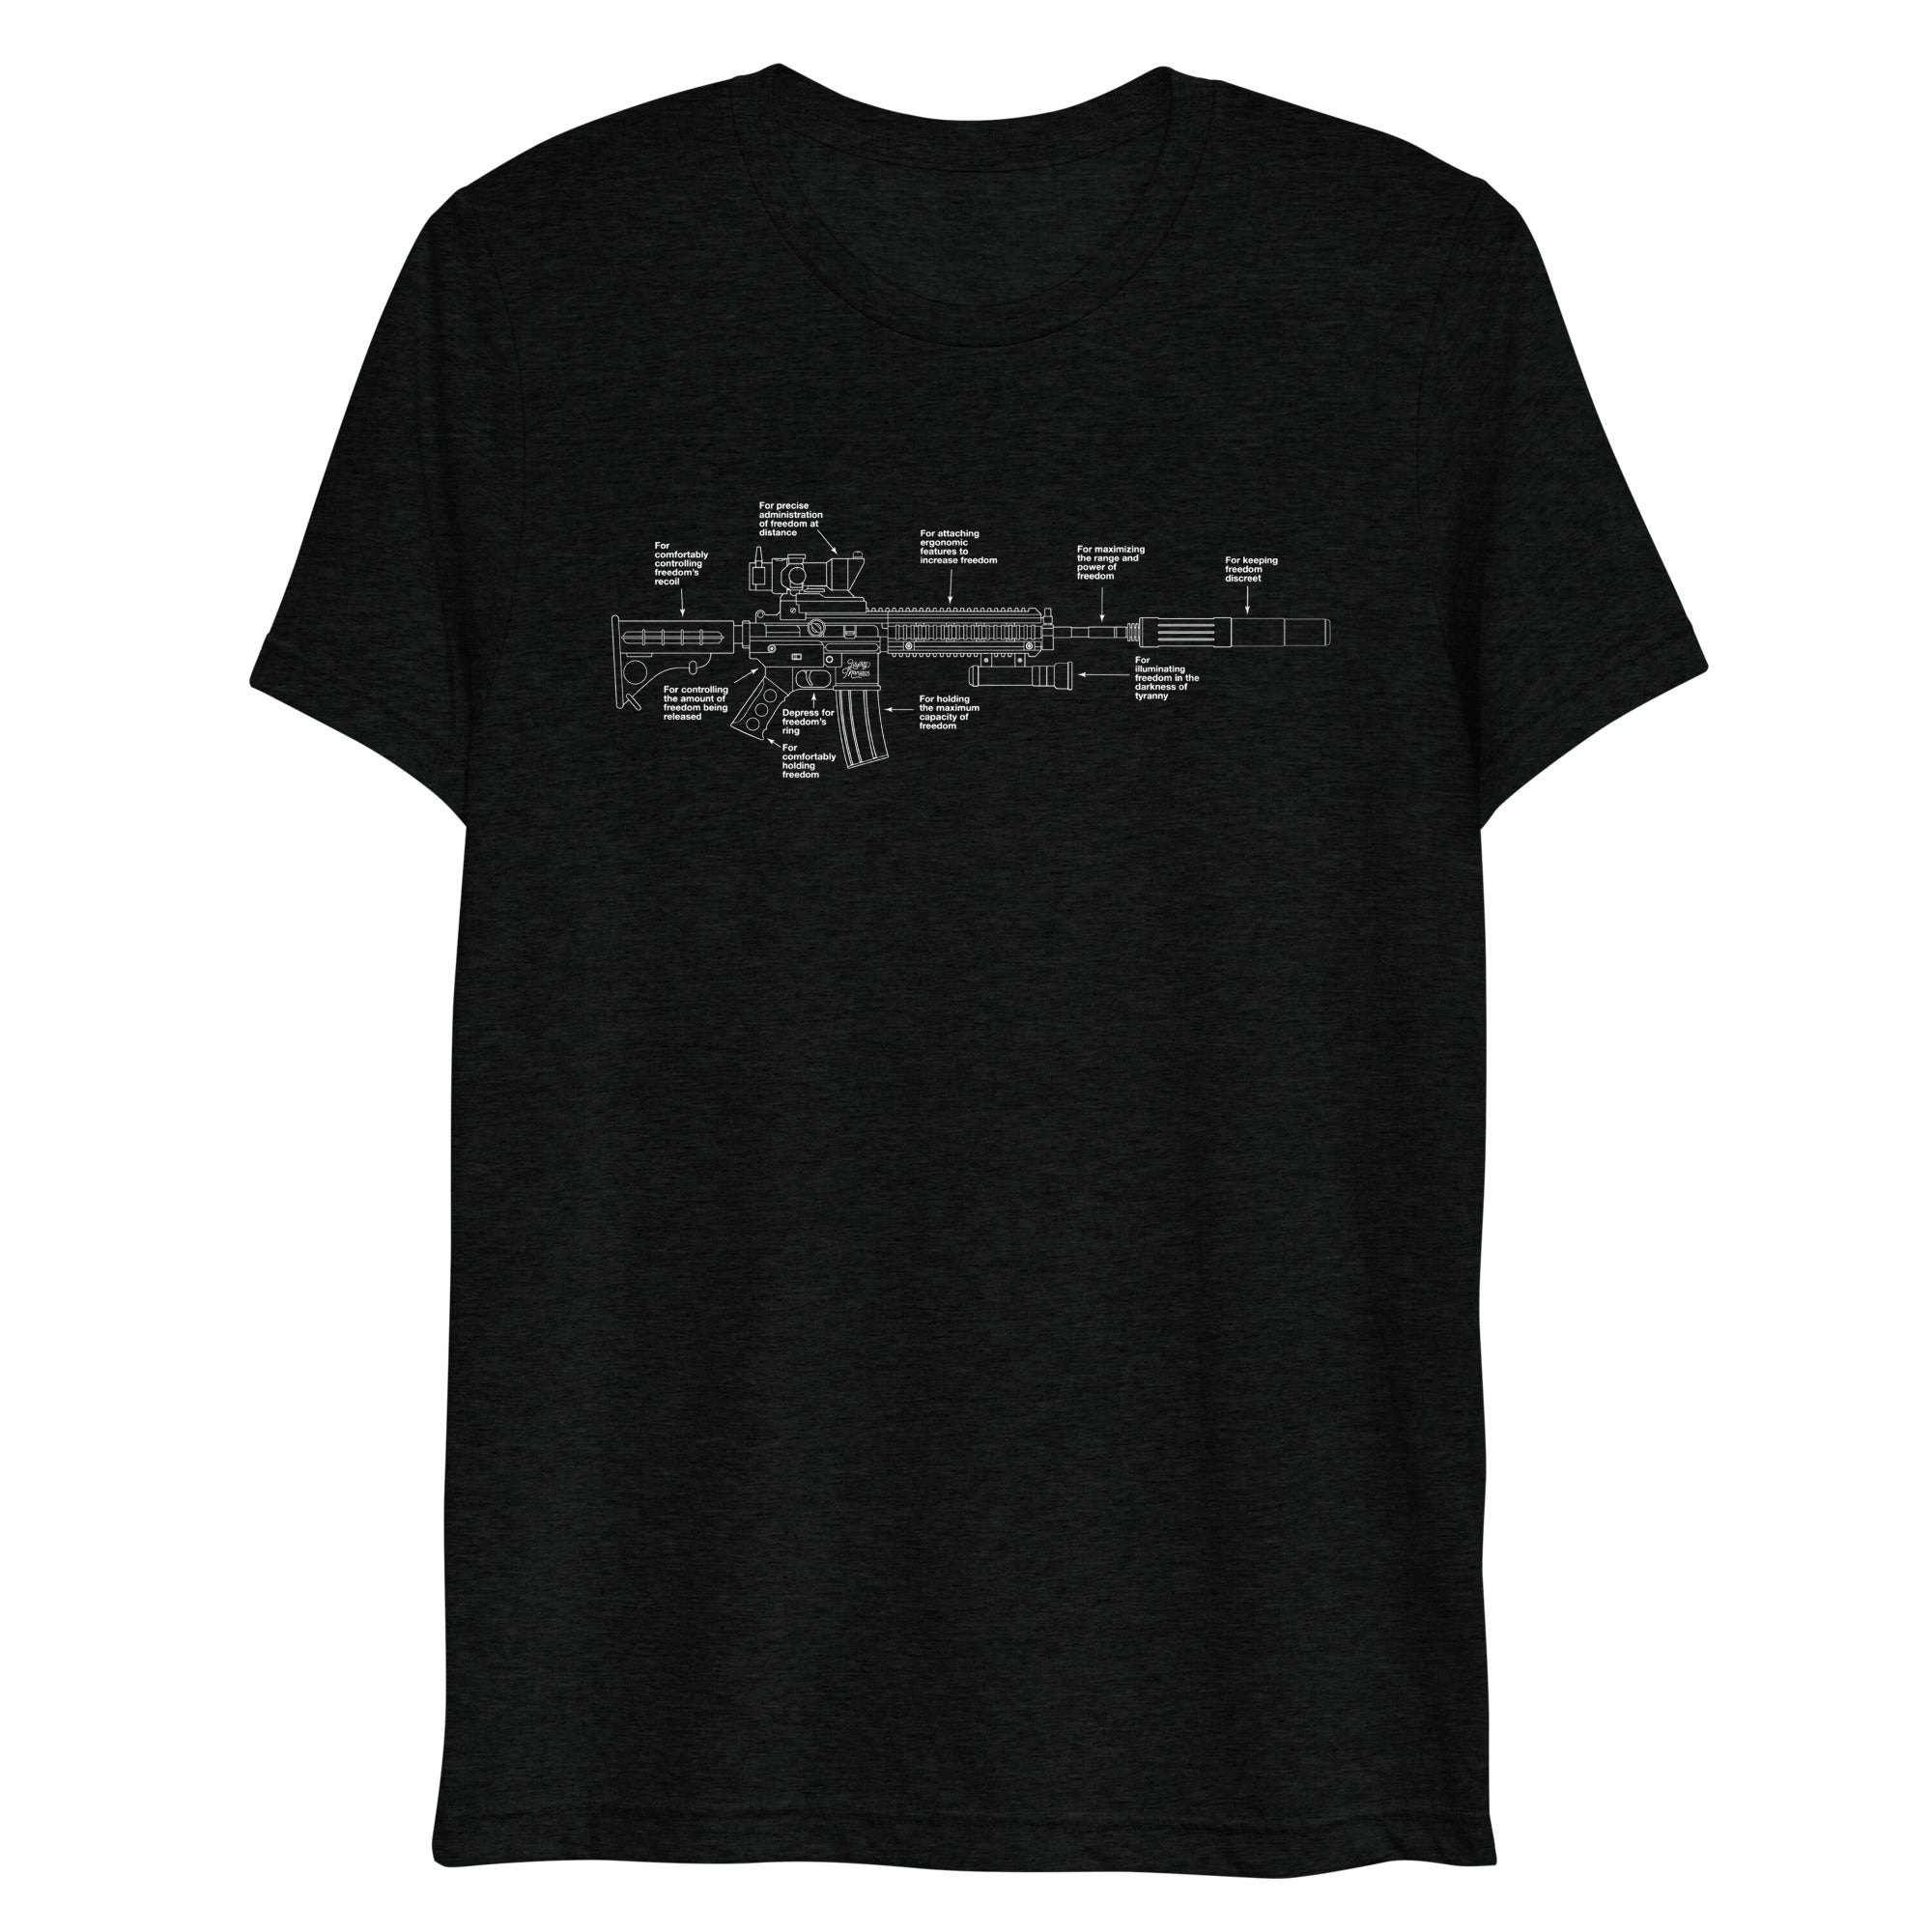 Components of Freedom Rifle Tri-Blend Shirt